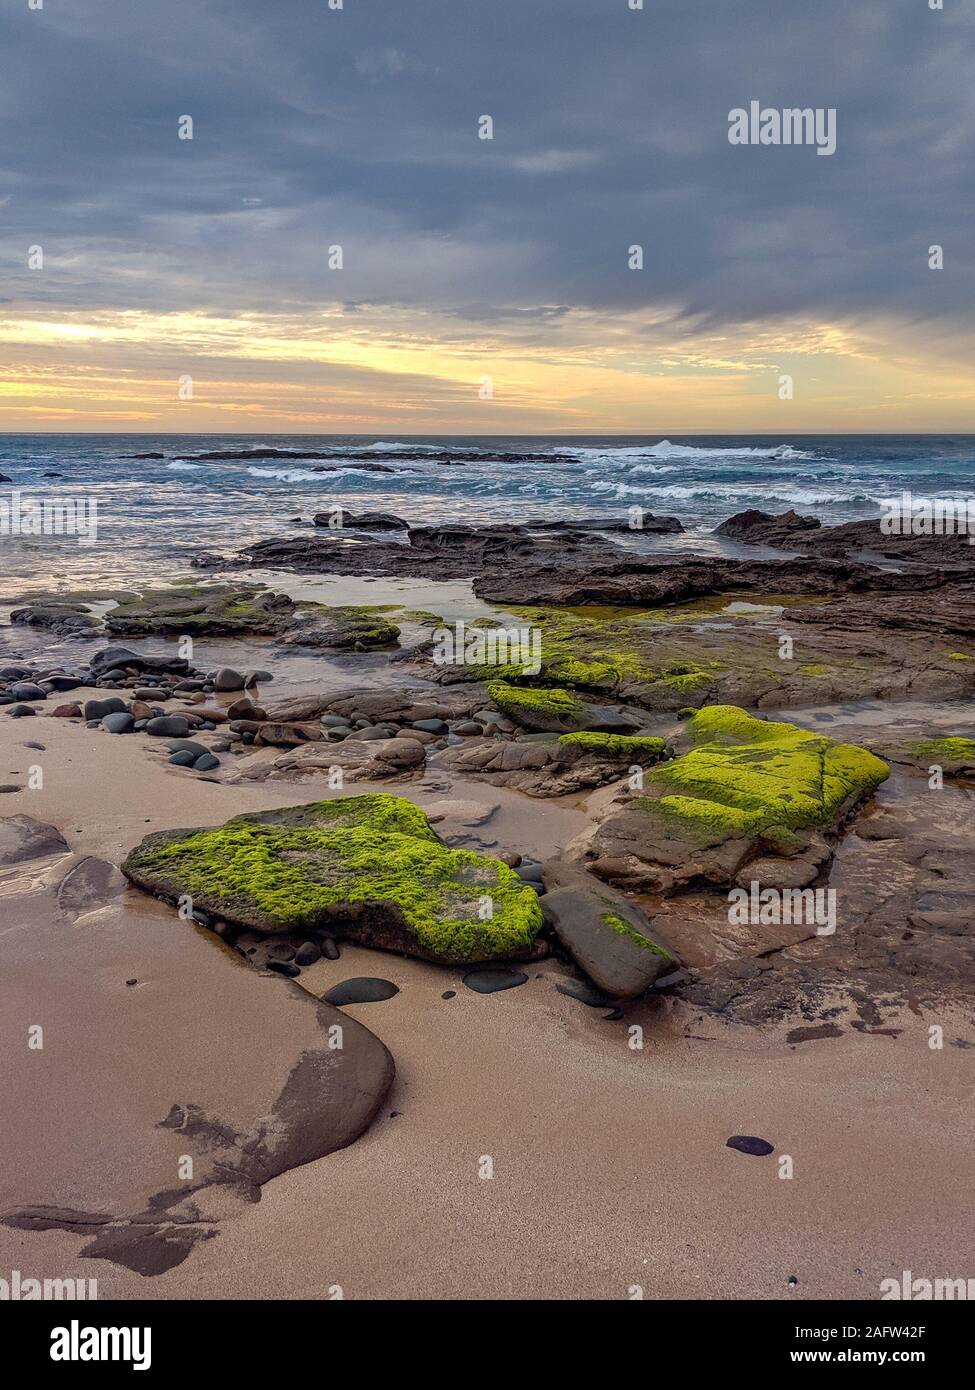 Sunrise on a rugged, rocky and sandy beach with green algae-covered stones on the Great Ocean Road at Sugarloaf, near Apollo Bay in Victoria, Australia Stock Photo